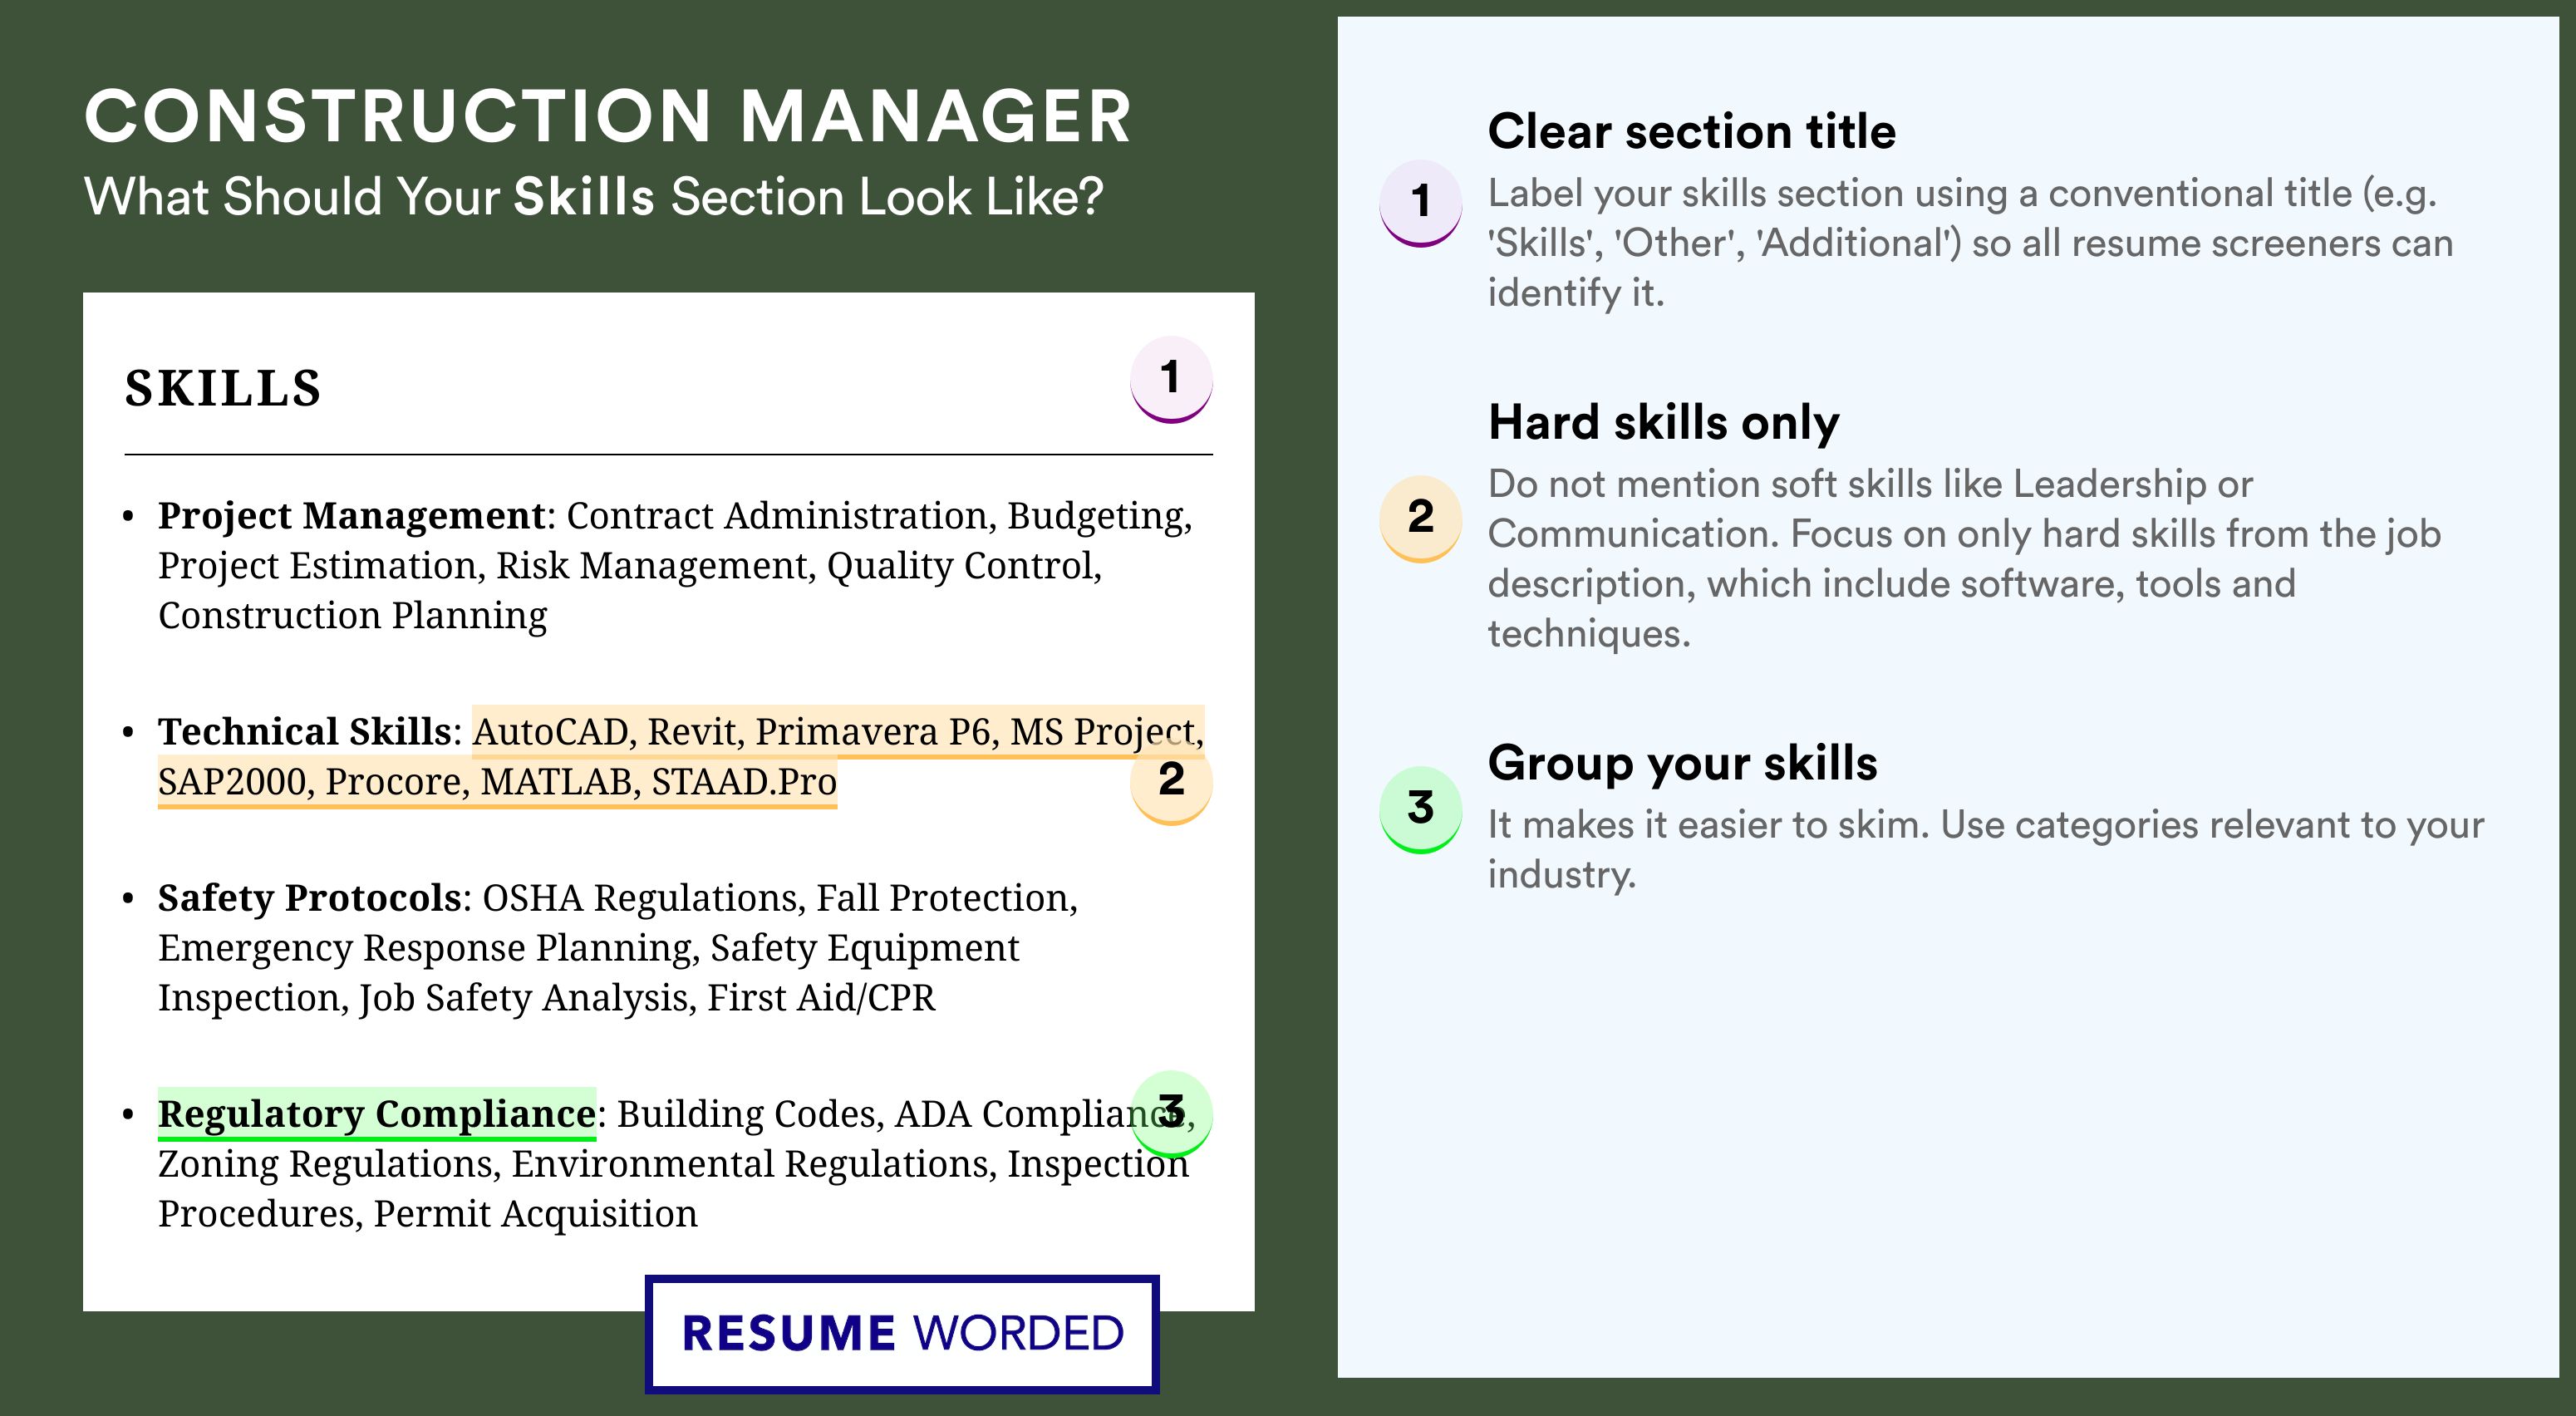 How To Write Your Skills Section - Construction Manager Roles